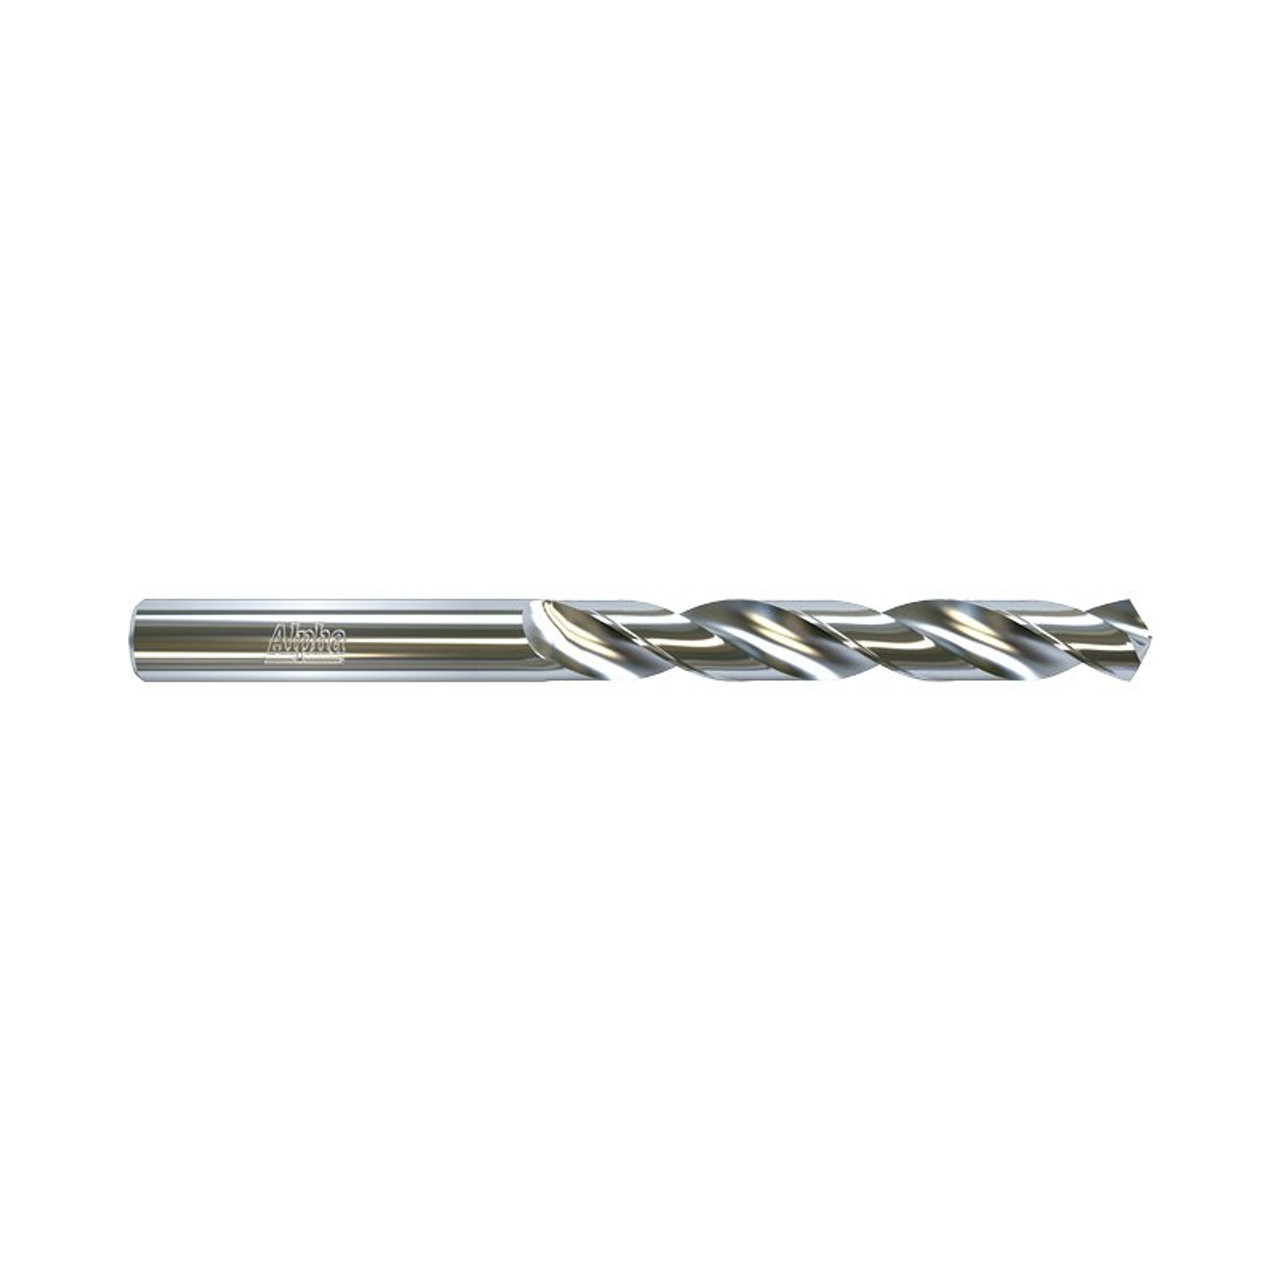 11.5Mm Jobber Drill Bit Carded - Silver Series